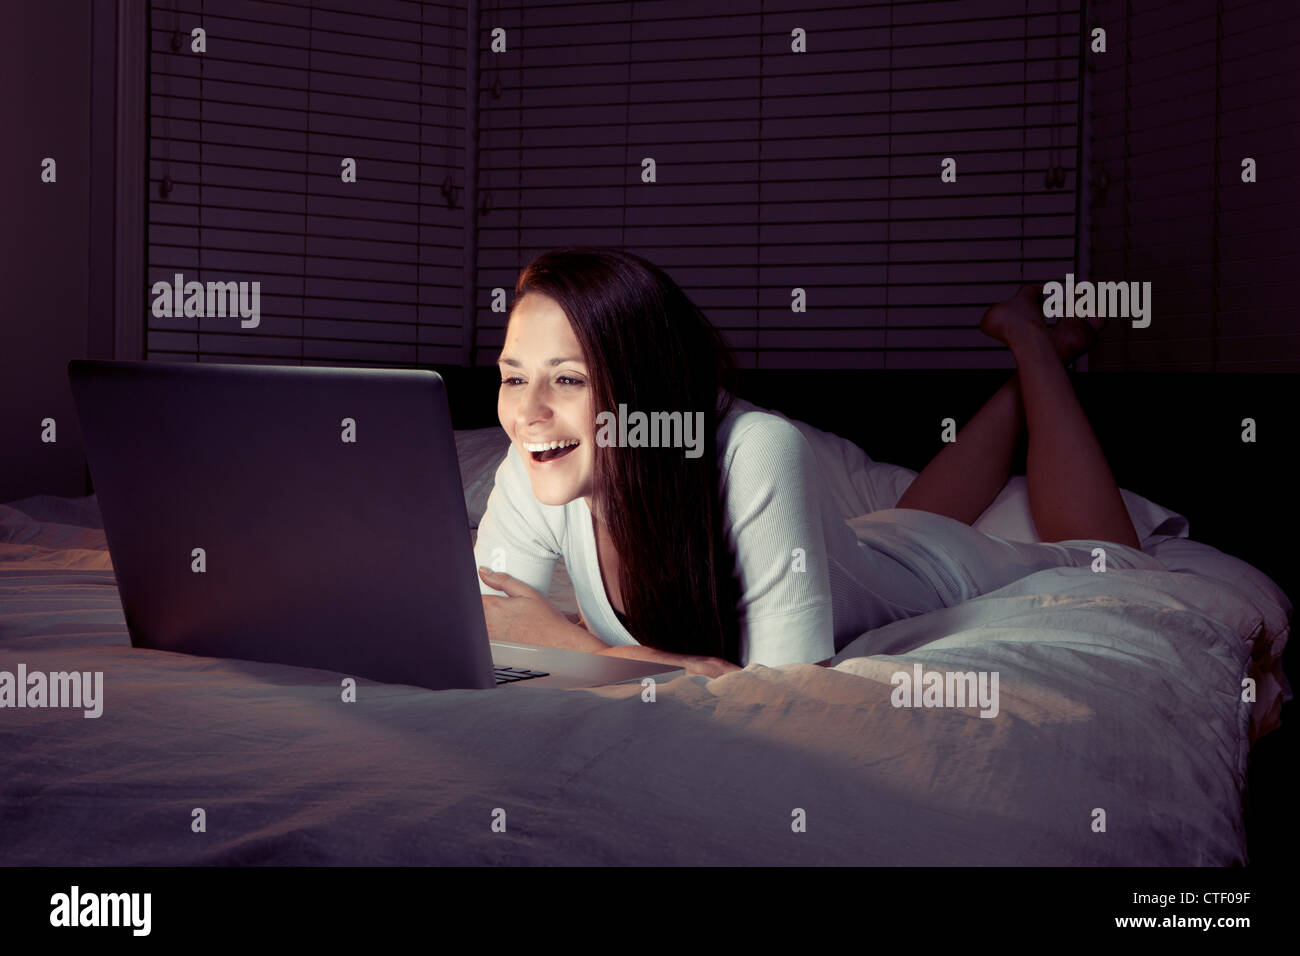 Texas, Austin, Woman using laptop in bed Banque D'Images